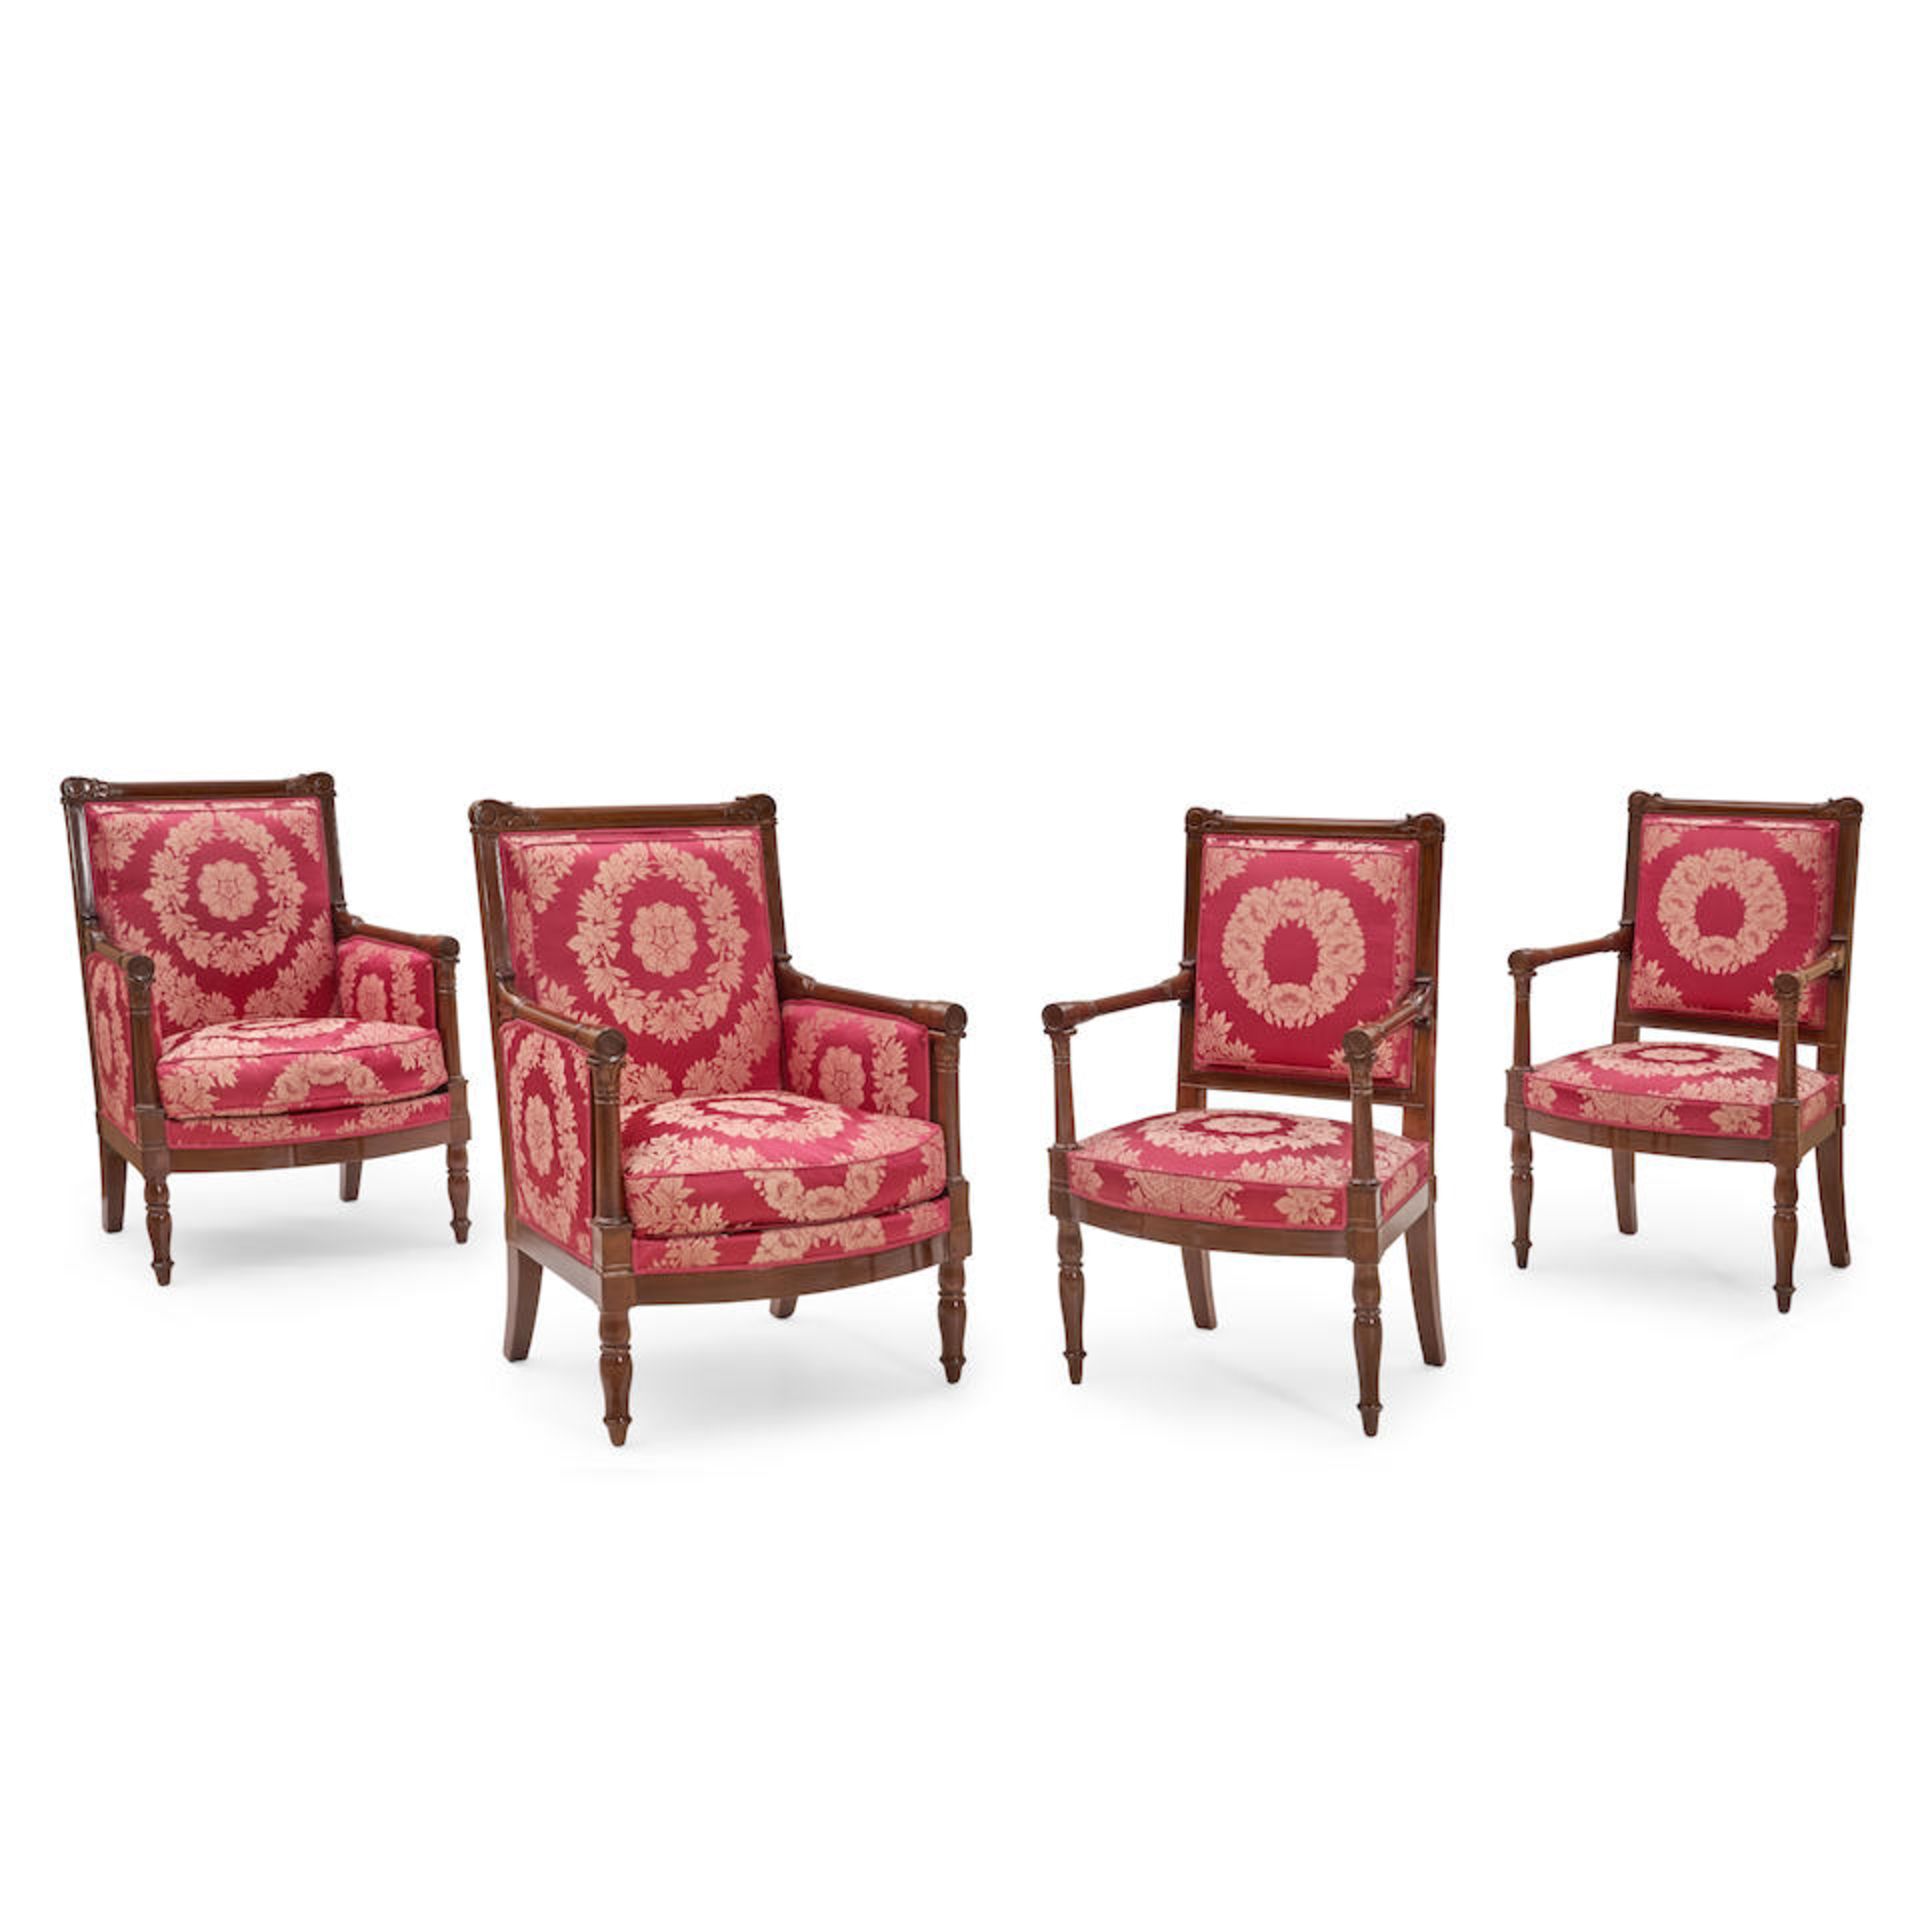 Suite of Four Louis-Philippe Upholstered Mahogany Armchairs, Jacob-Desmalter (1803-13), Paris, F...